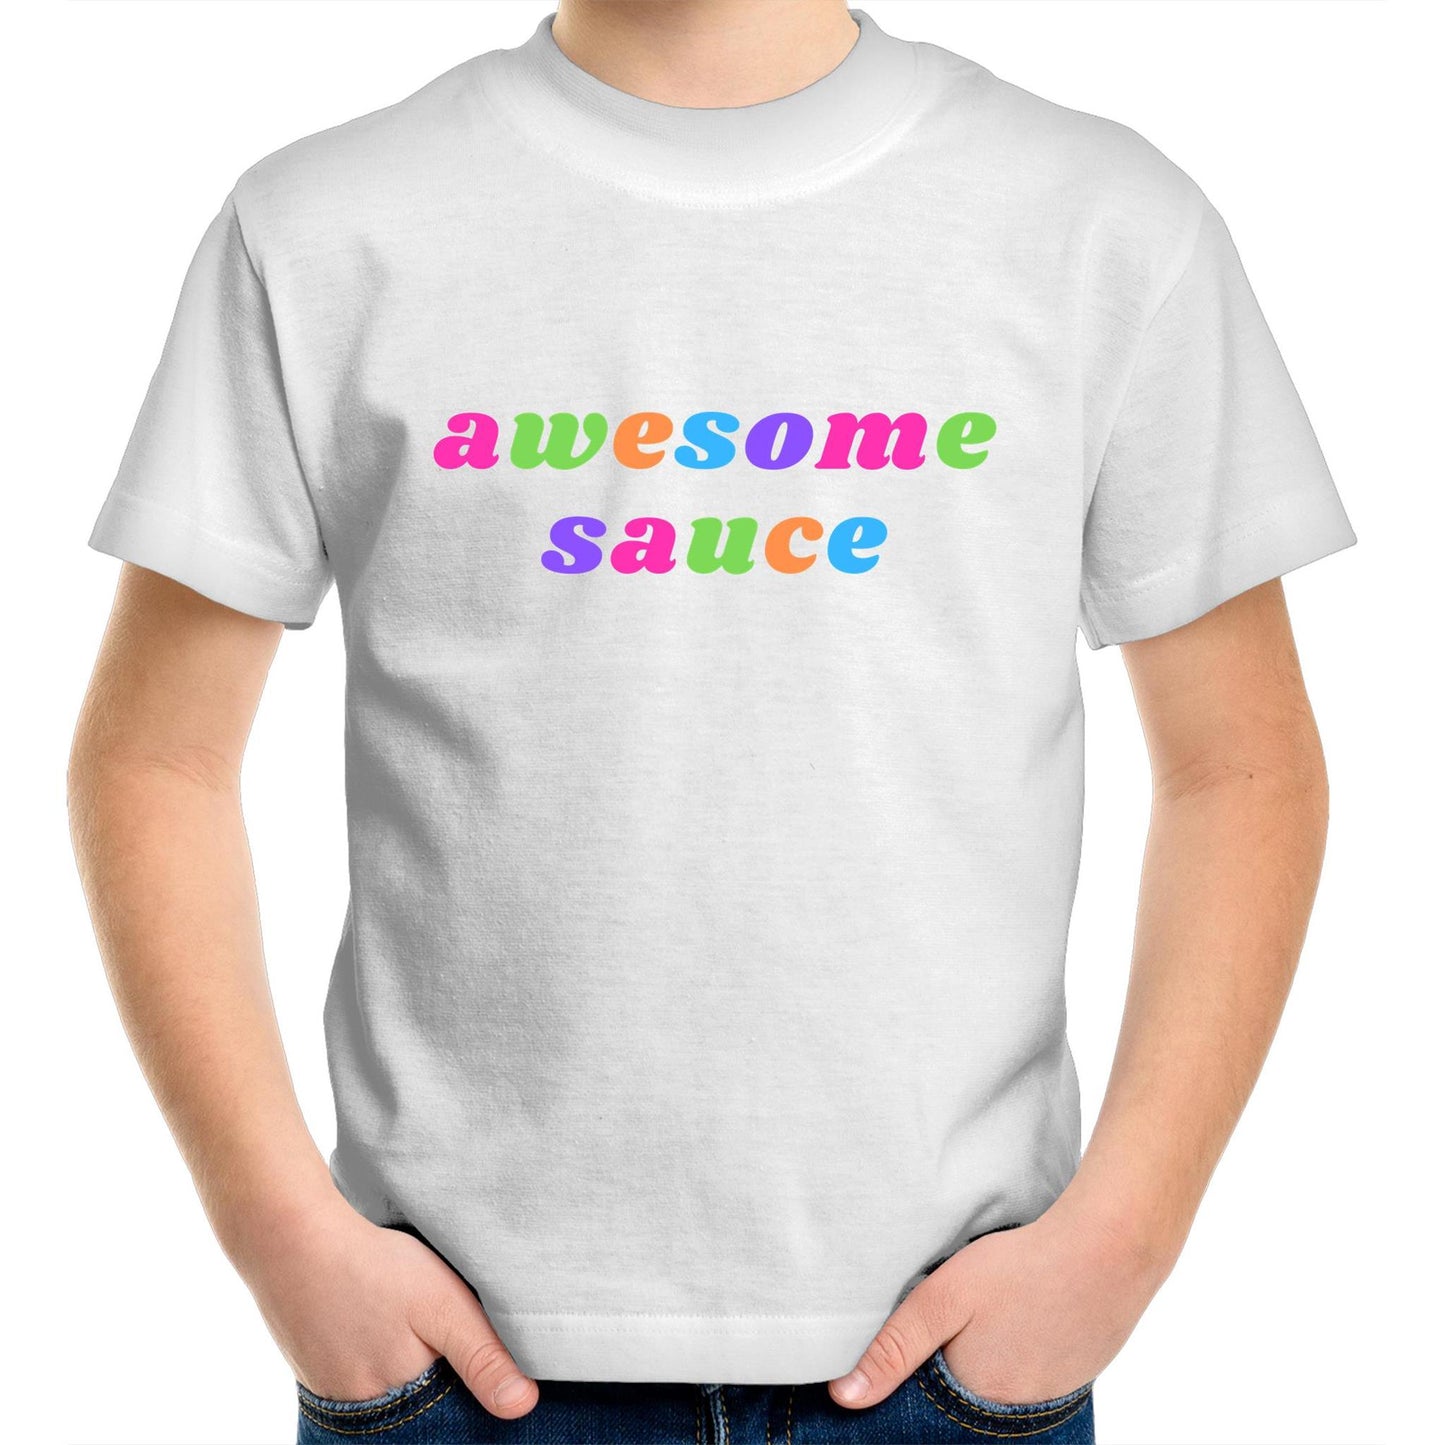 Awesome Sauce - Kids Youth Crew T-Shirt White Kids Youth T-shirt